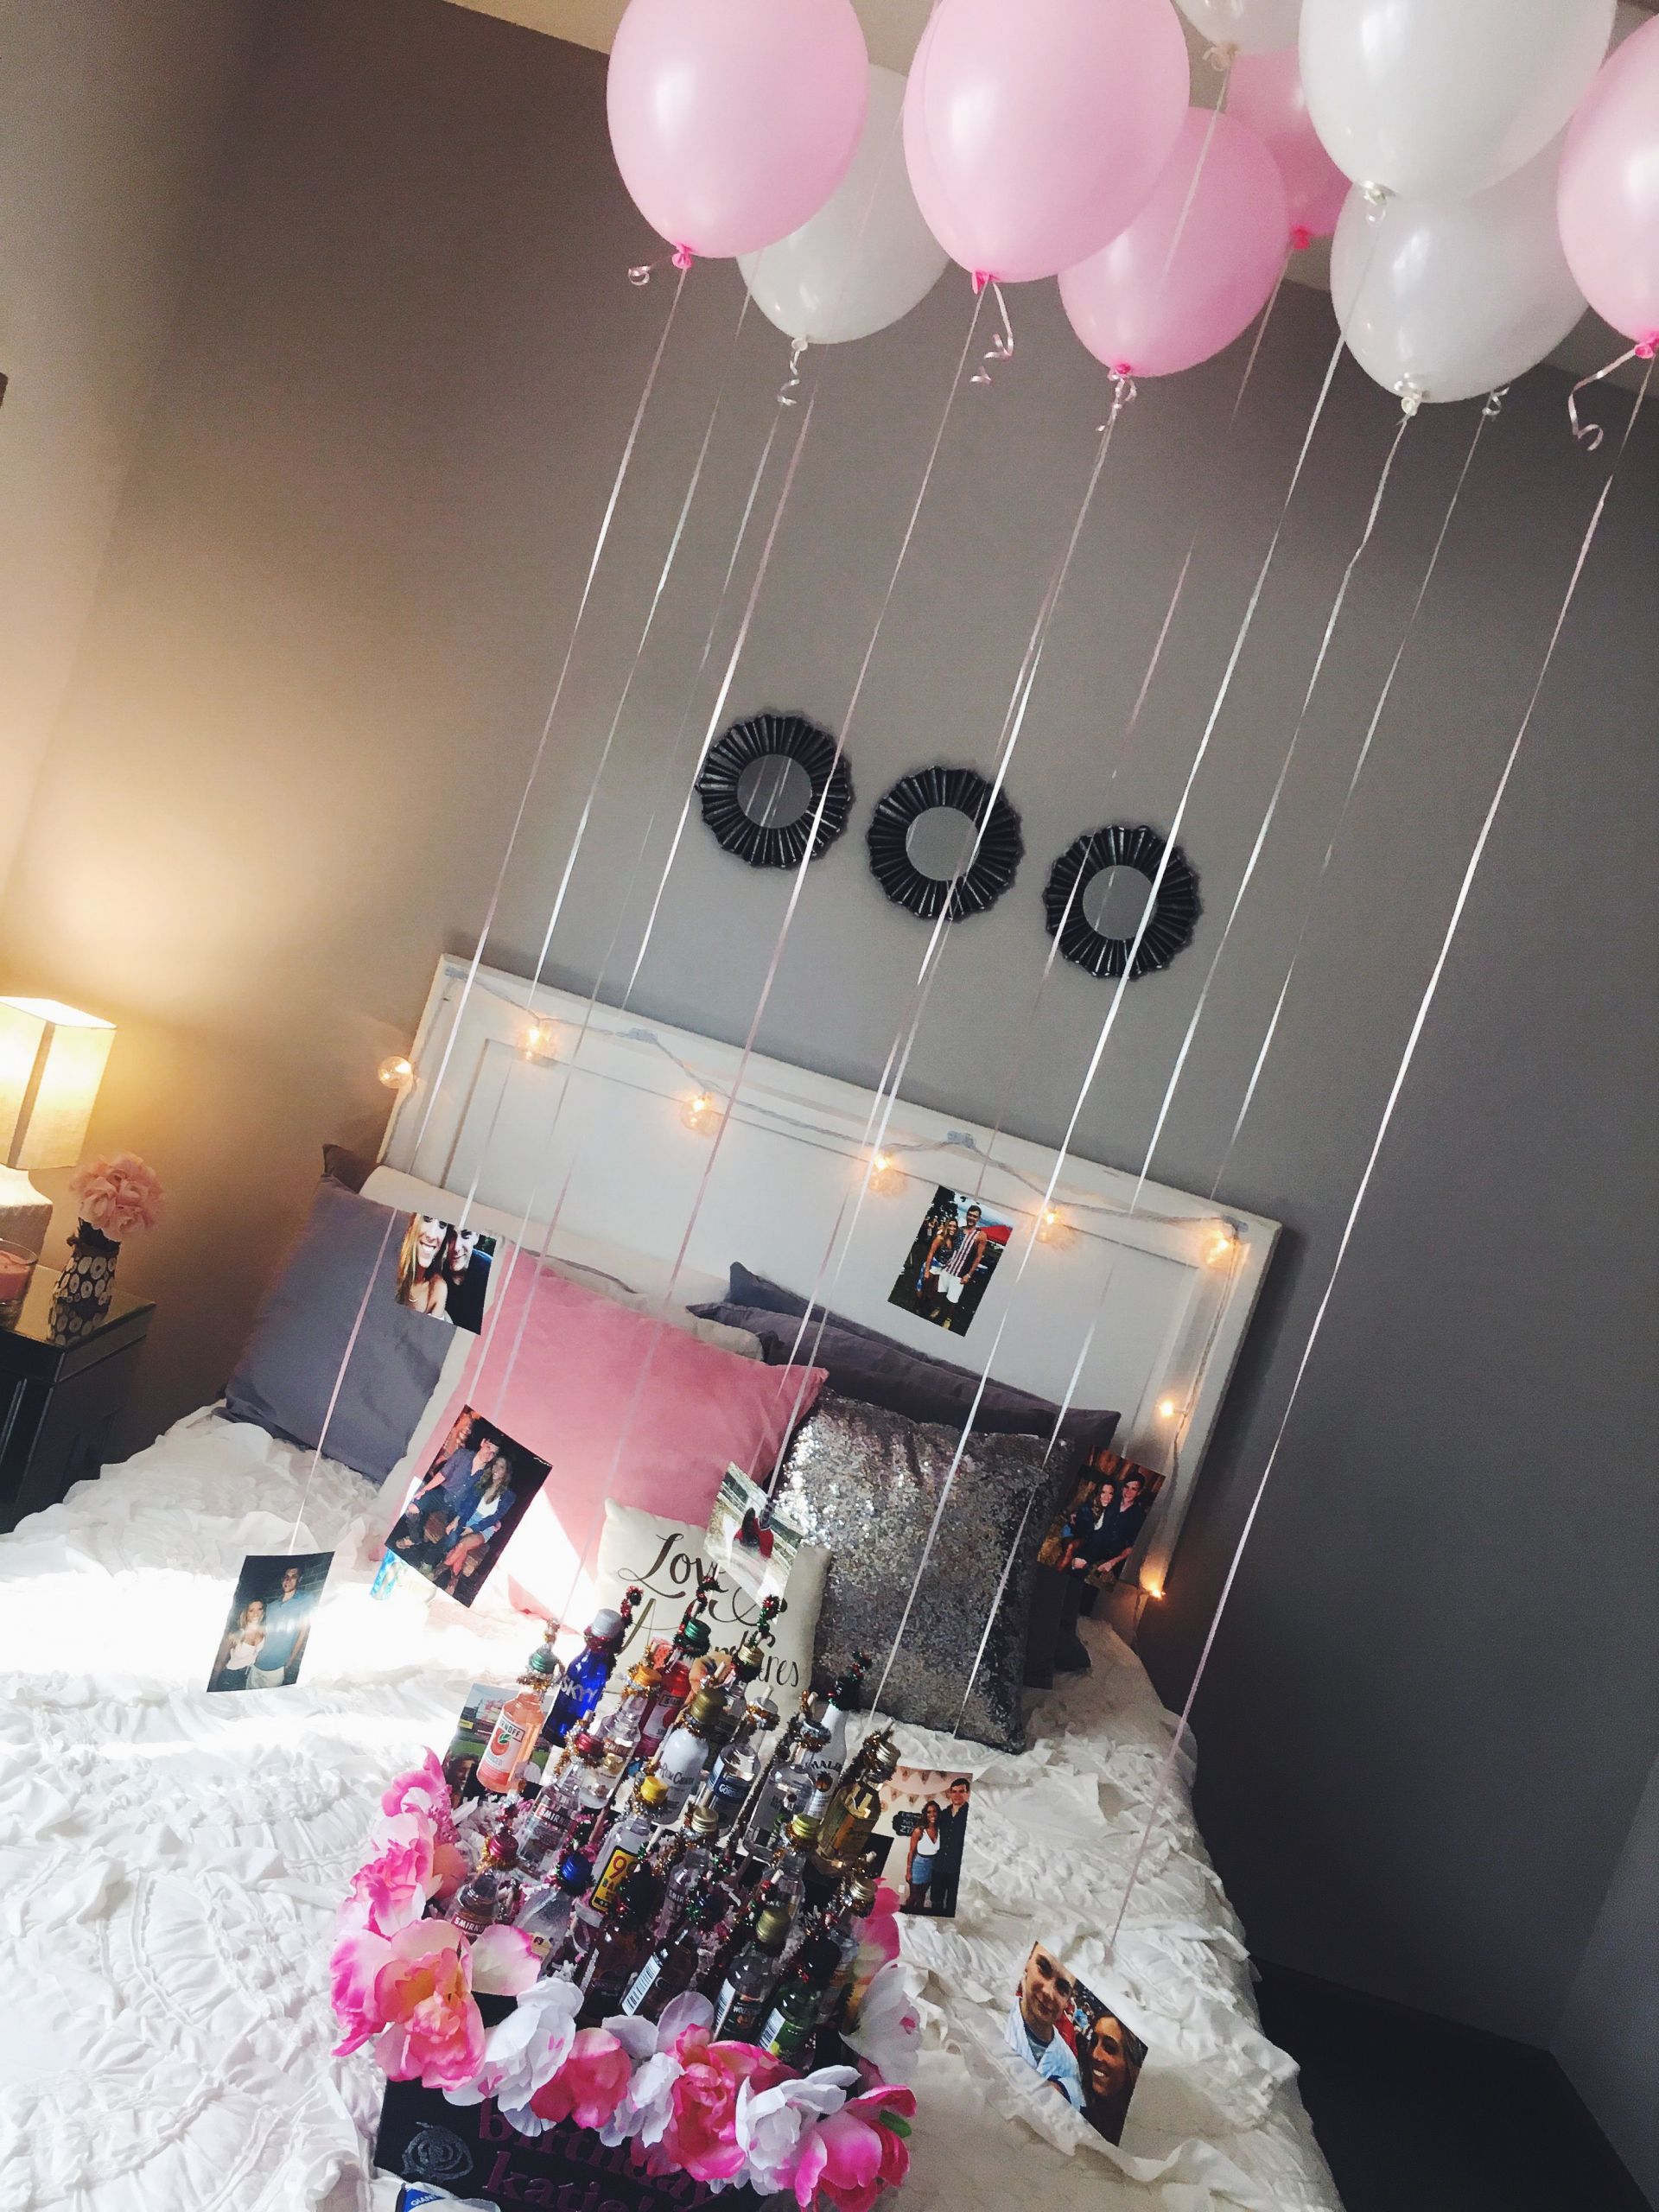 Gift Ideas For New Girlfriend Birthday
 easy and cute decorations for a friend or girlfriends 21st